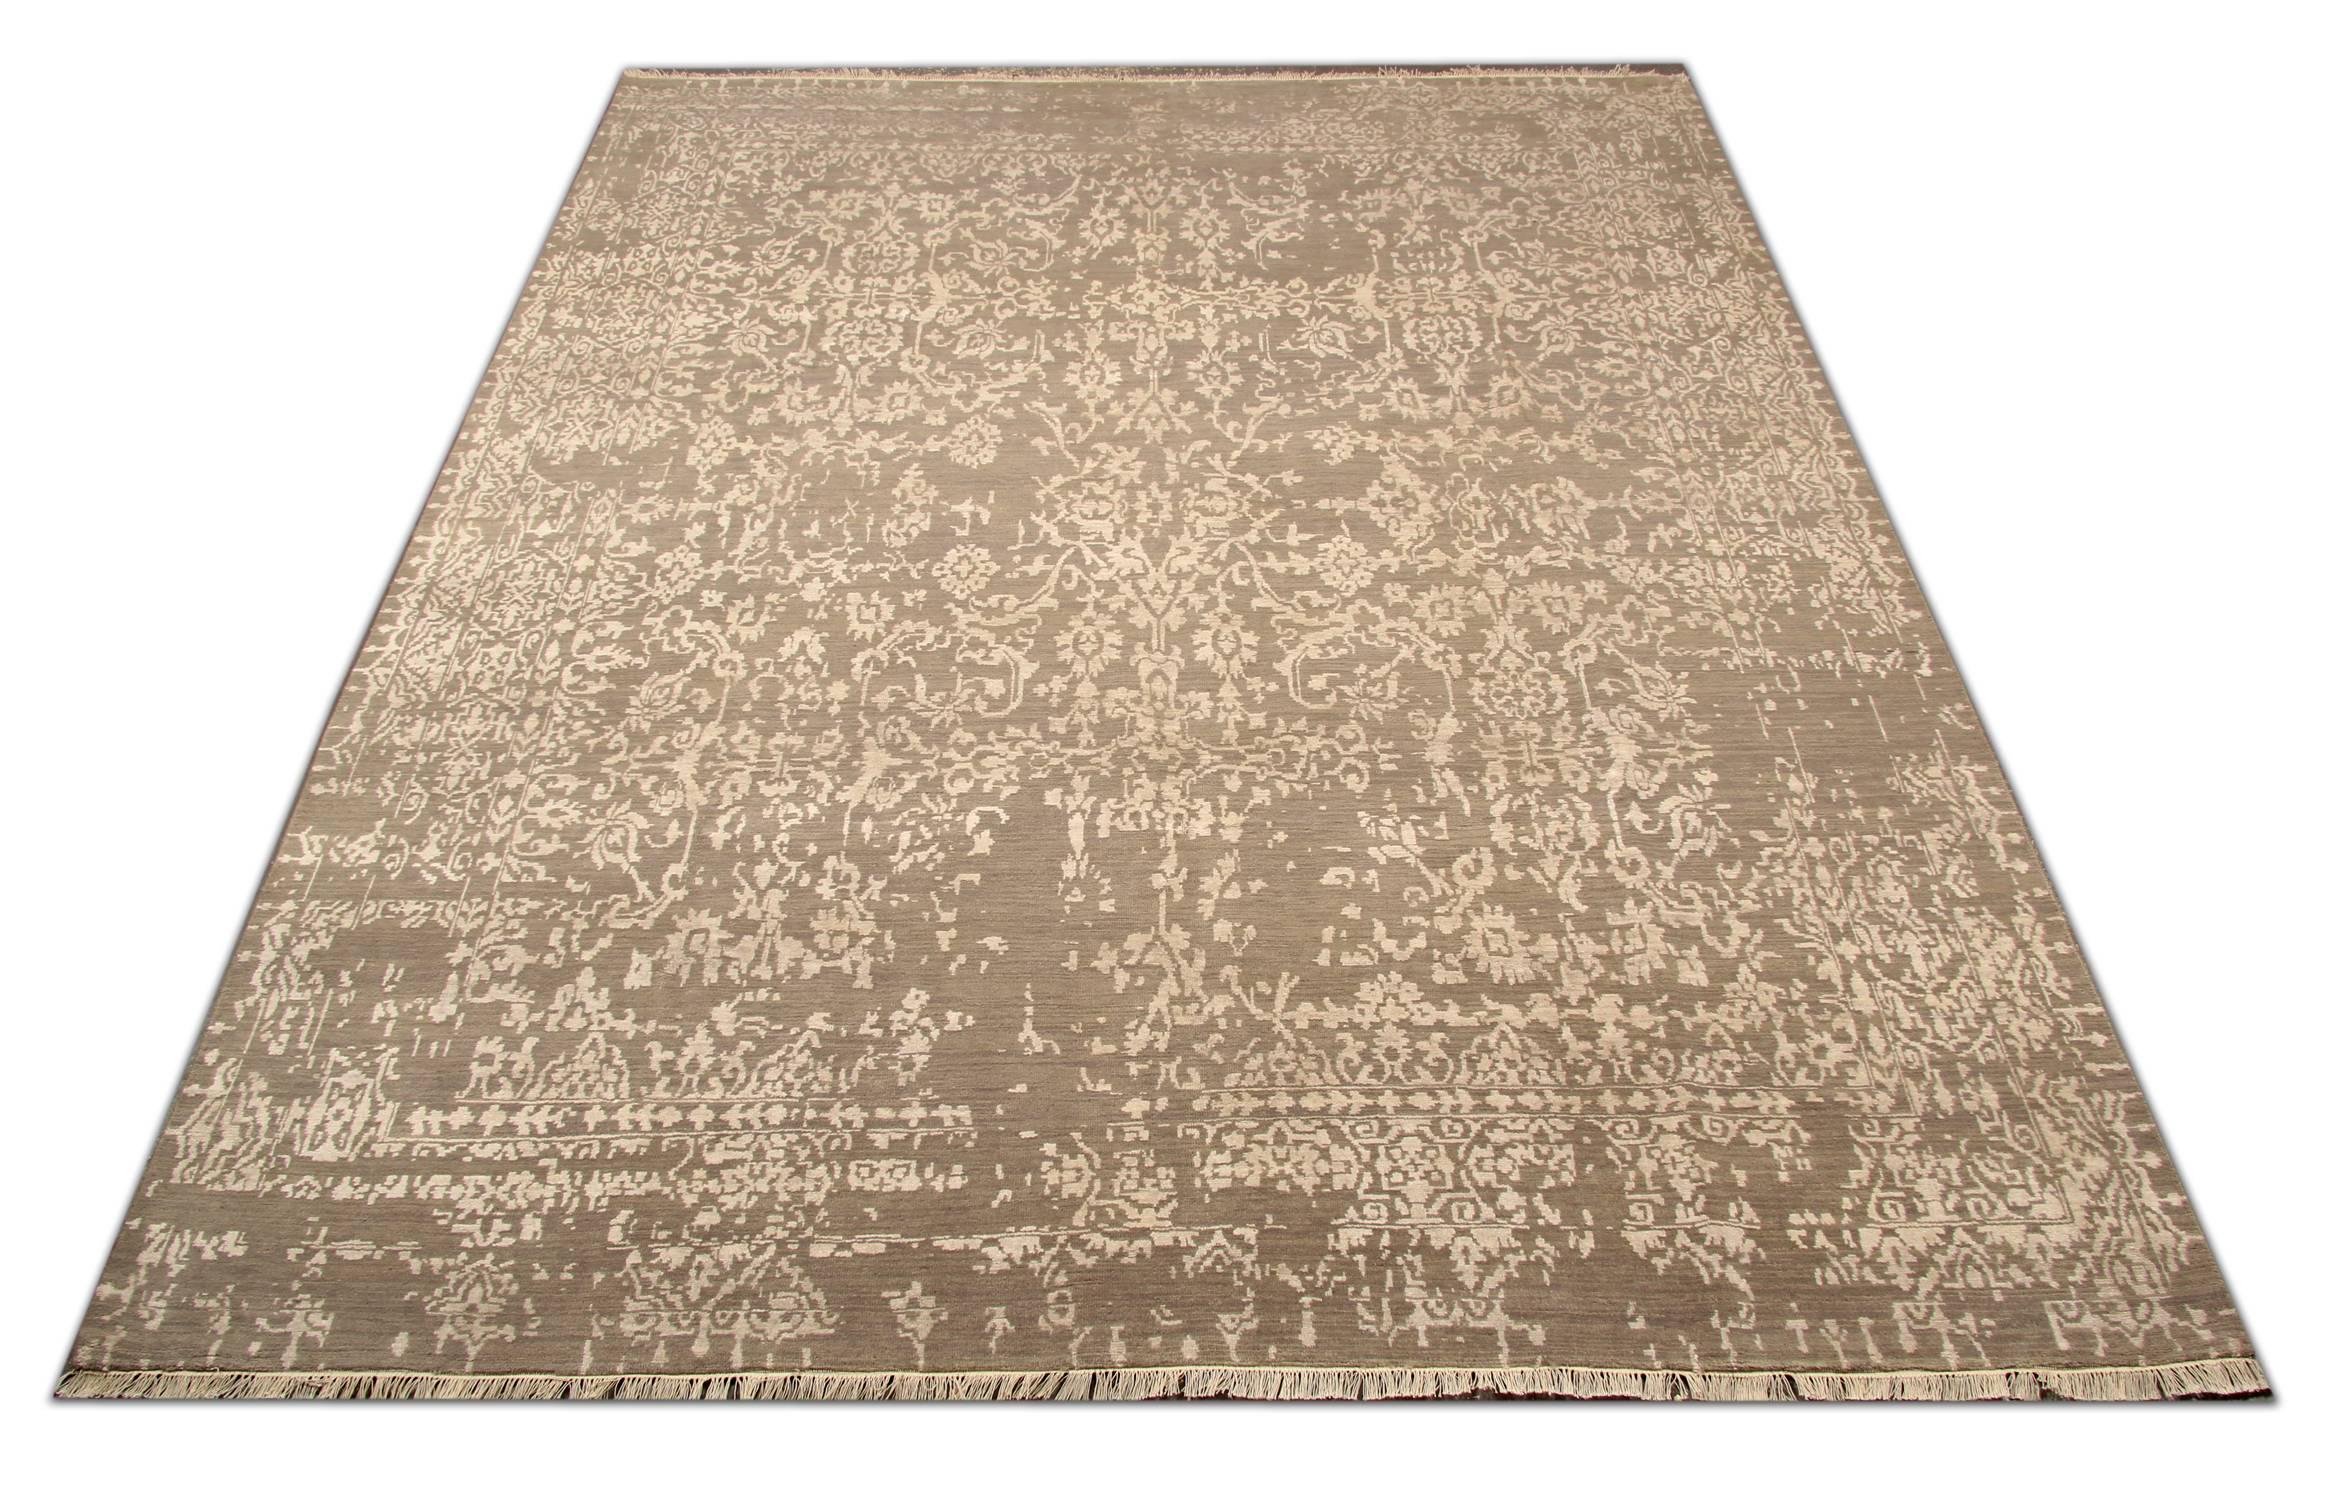 This handmade carpet oriental rug has an inherently sophisticated quality, from adding texture to monochromatic interiors to keeping the overall design scheme controlled instead of wild. A transitional brown- grey rug like this one has the power to